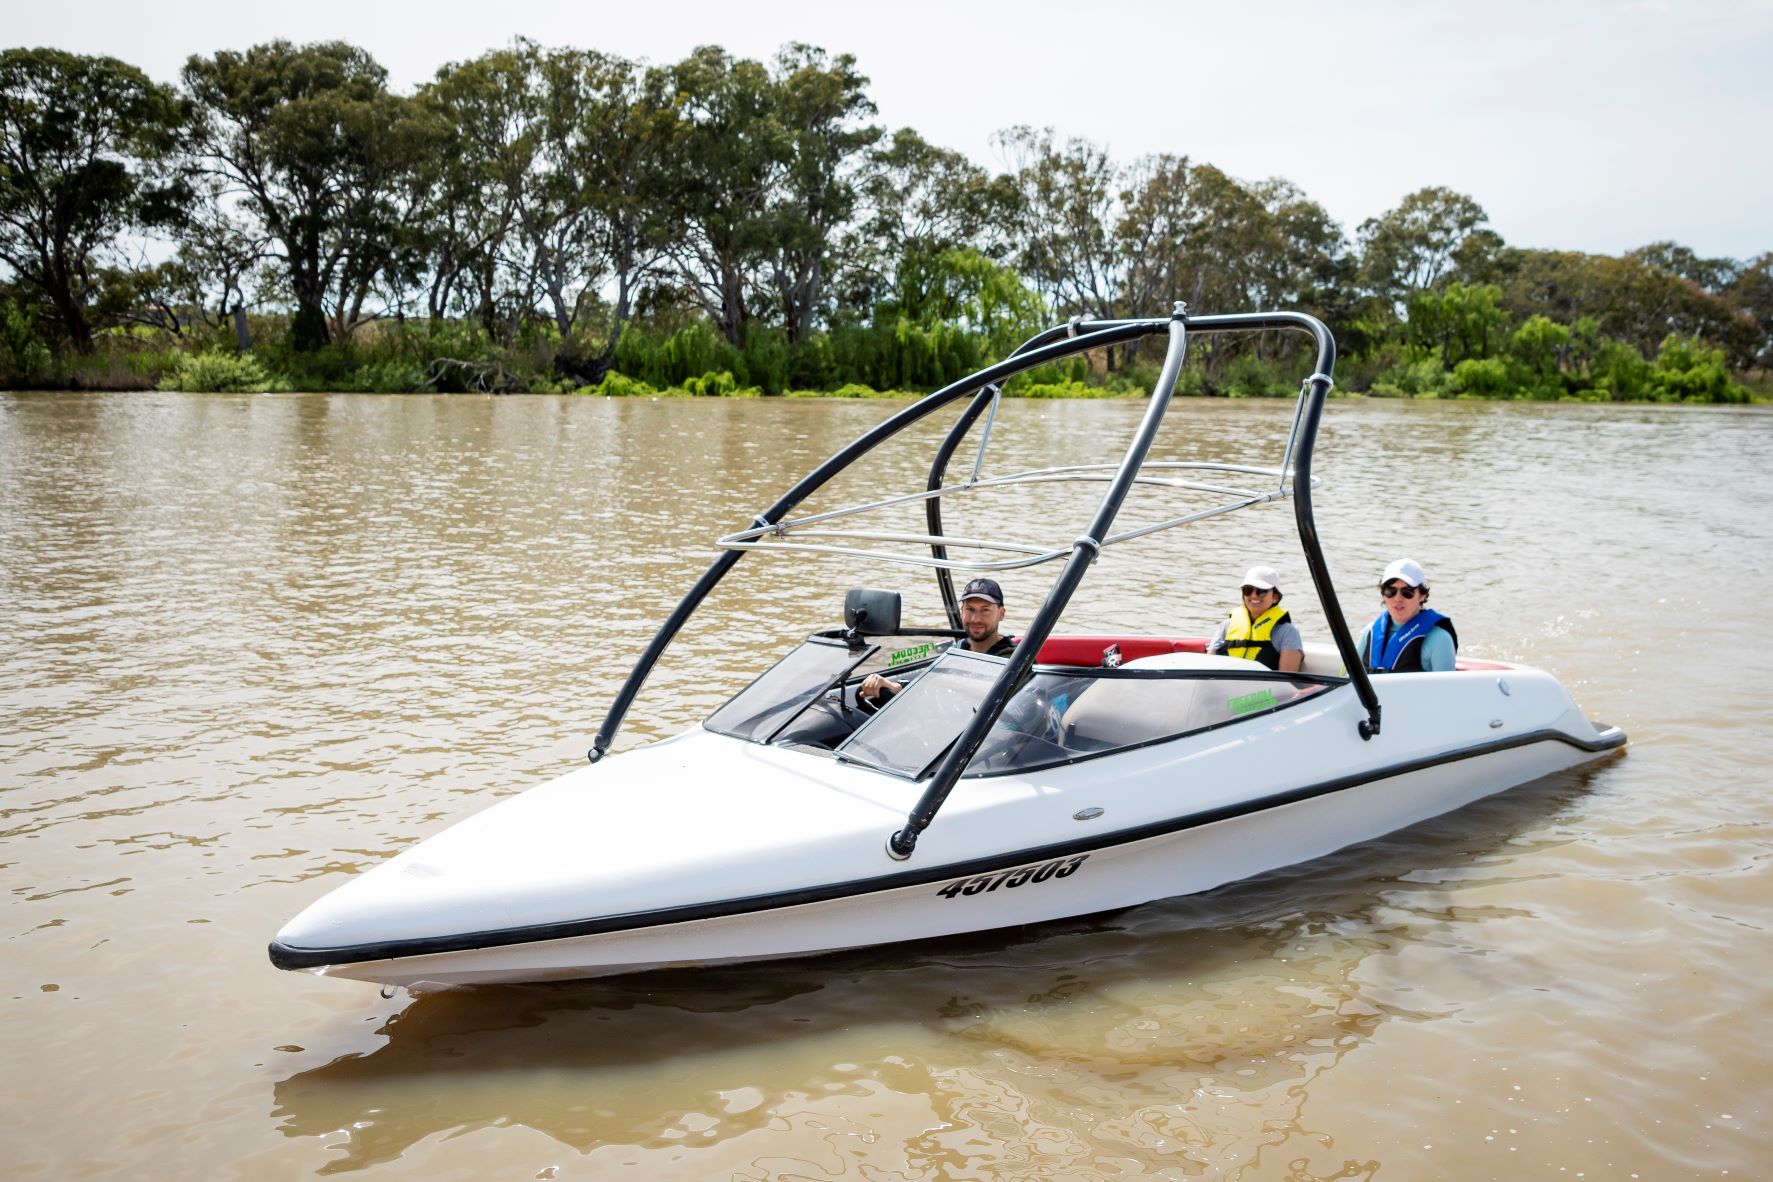 Ski boat on the River Murray with three people on board